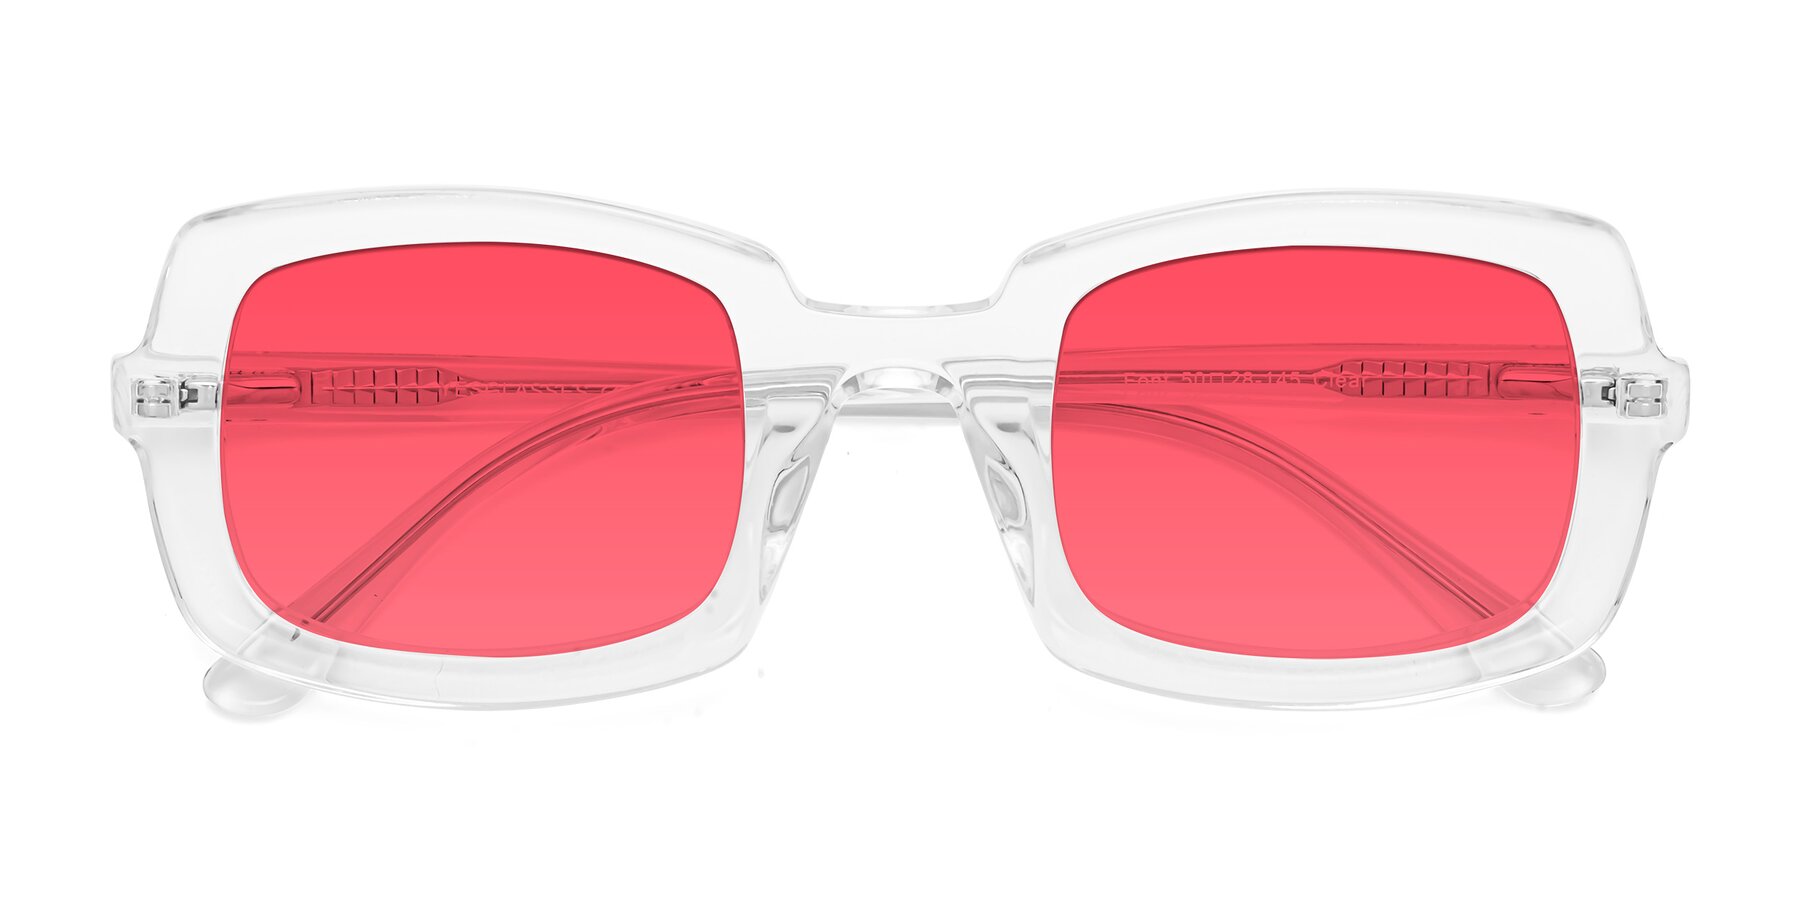 Clear Hipster Oversized Square Tinted Sunglasses with Red Sunwear Lenses